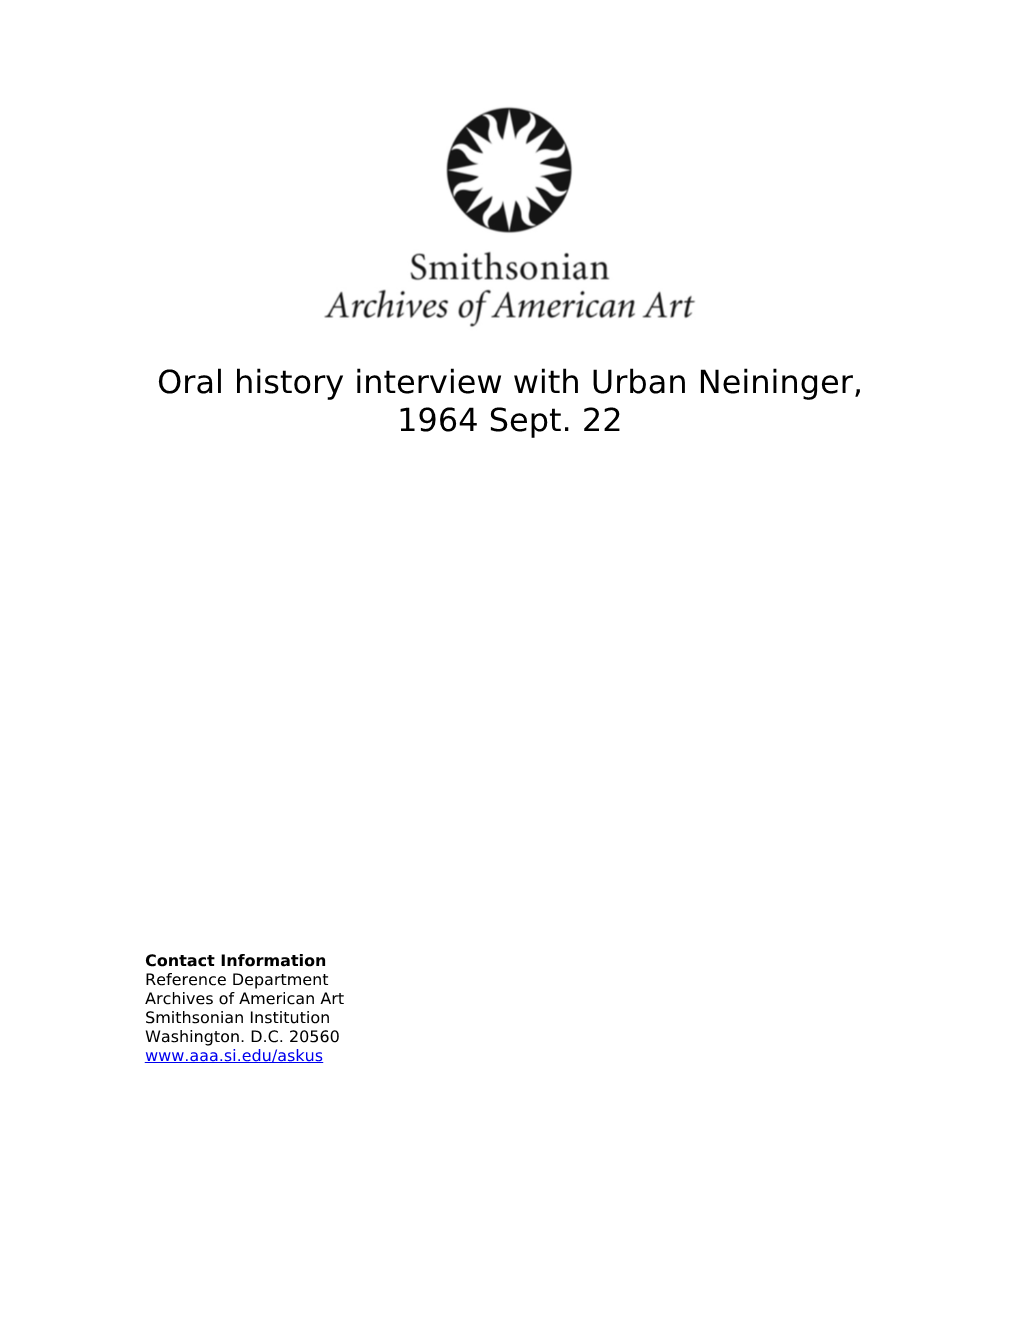 Oral History Interview with Urban Neininger, 1964 Sept. 22